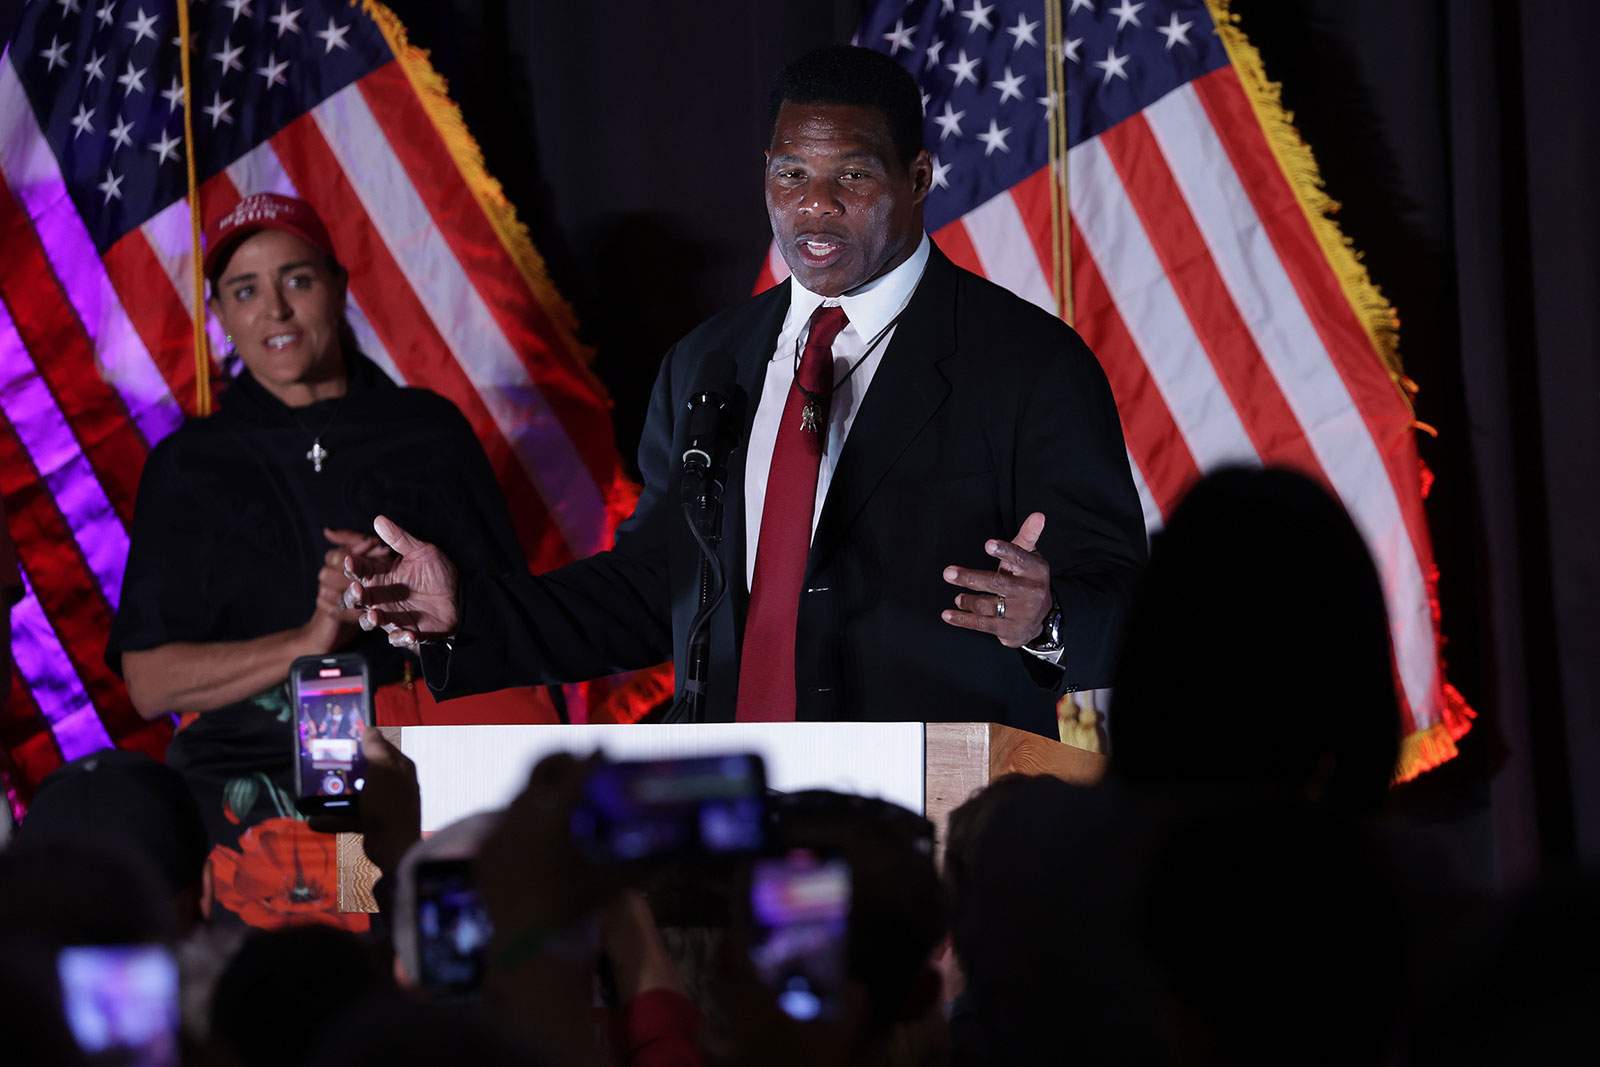 Herschel Walker speaks to supporters during an election night event in Atlanta on Tuesday.